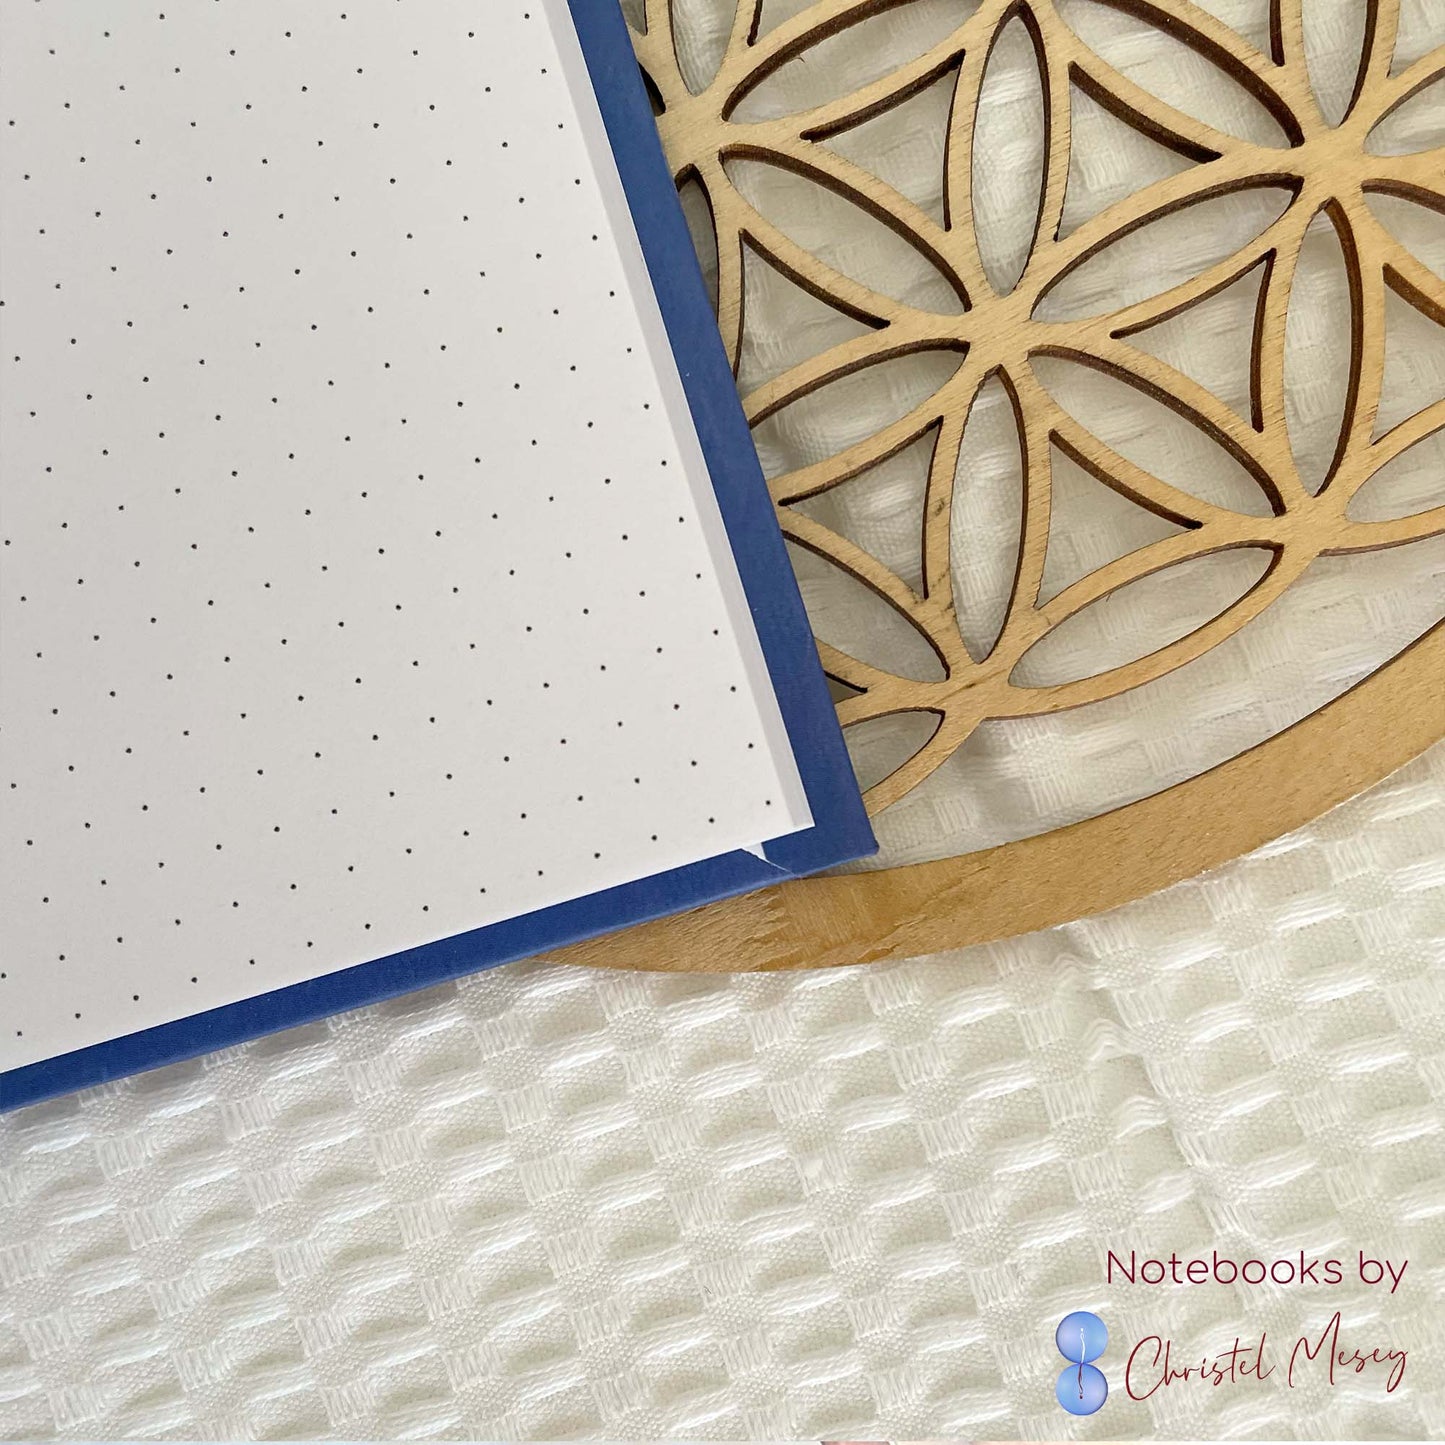 Centre - HardcoverNOTEBOOK - Get Back to Centre - Hardcover with Dotted pages